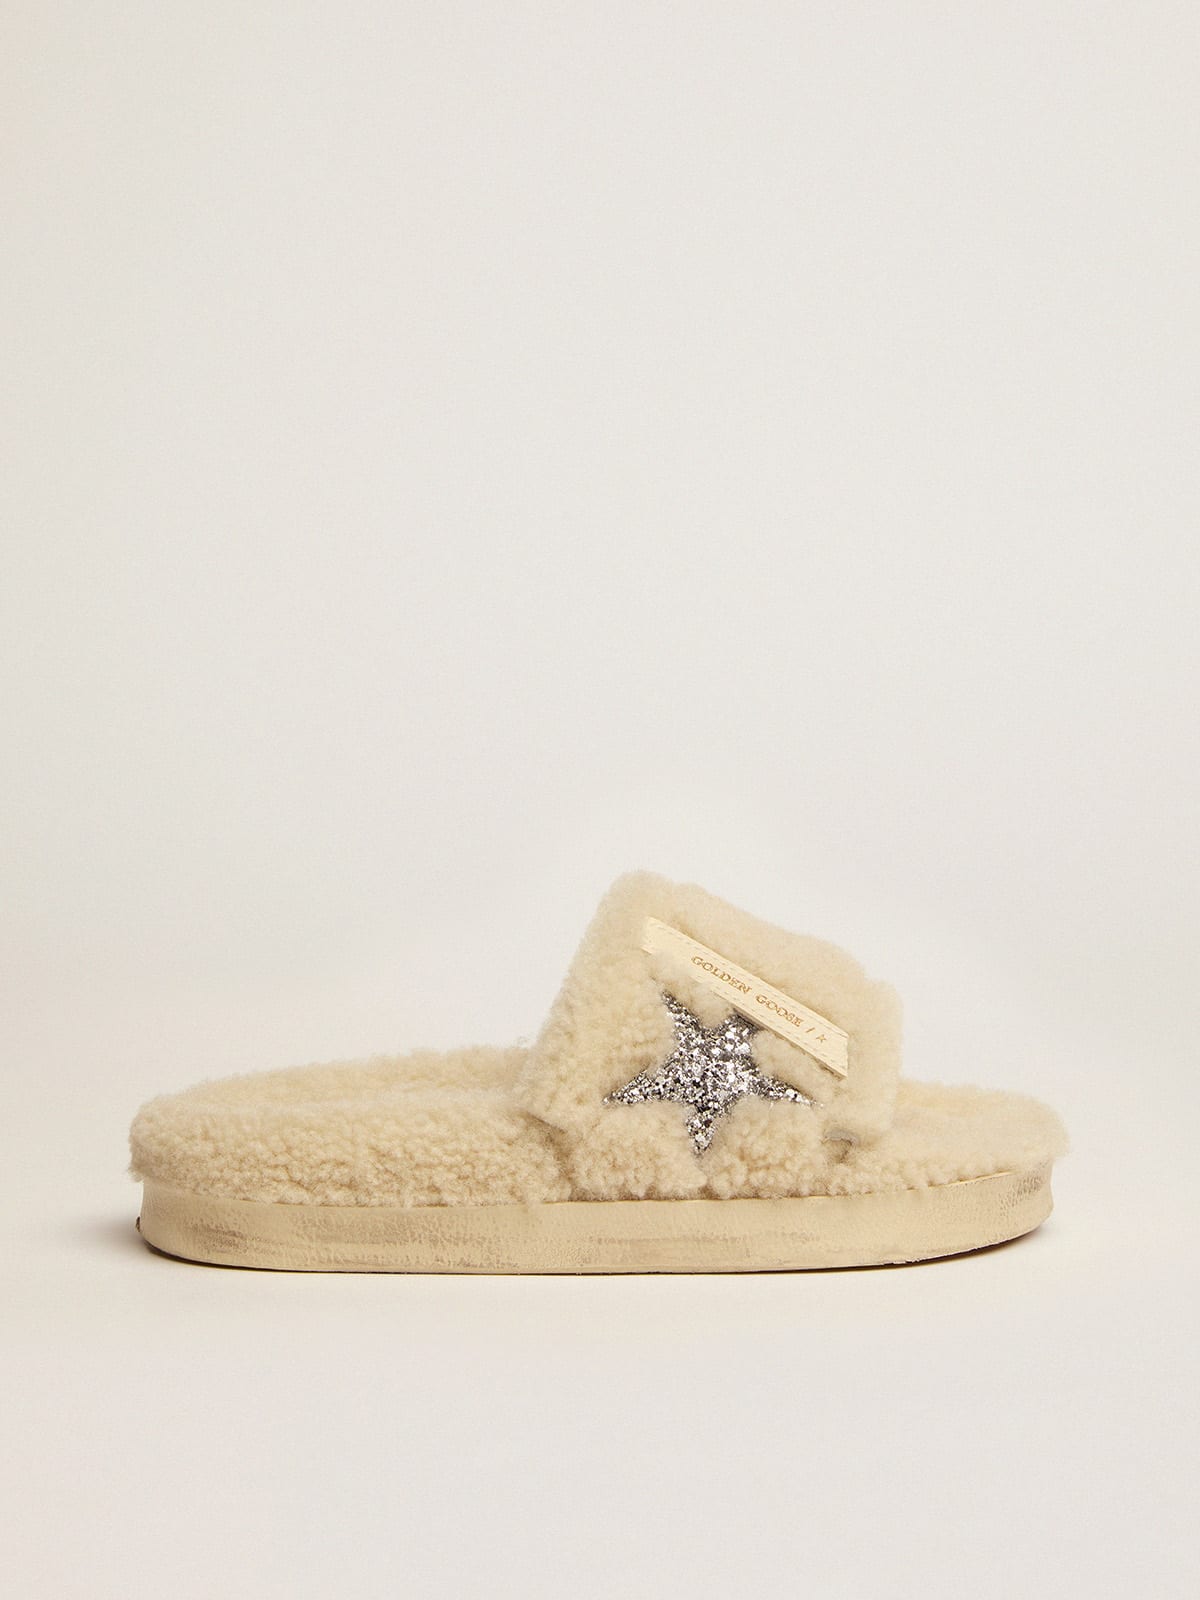 Beige shearling Poolstars with silver glitter star